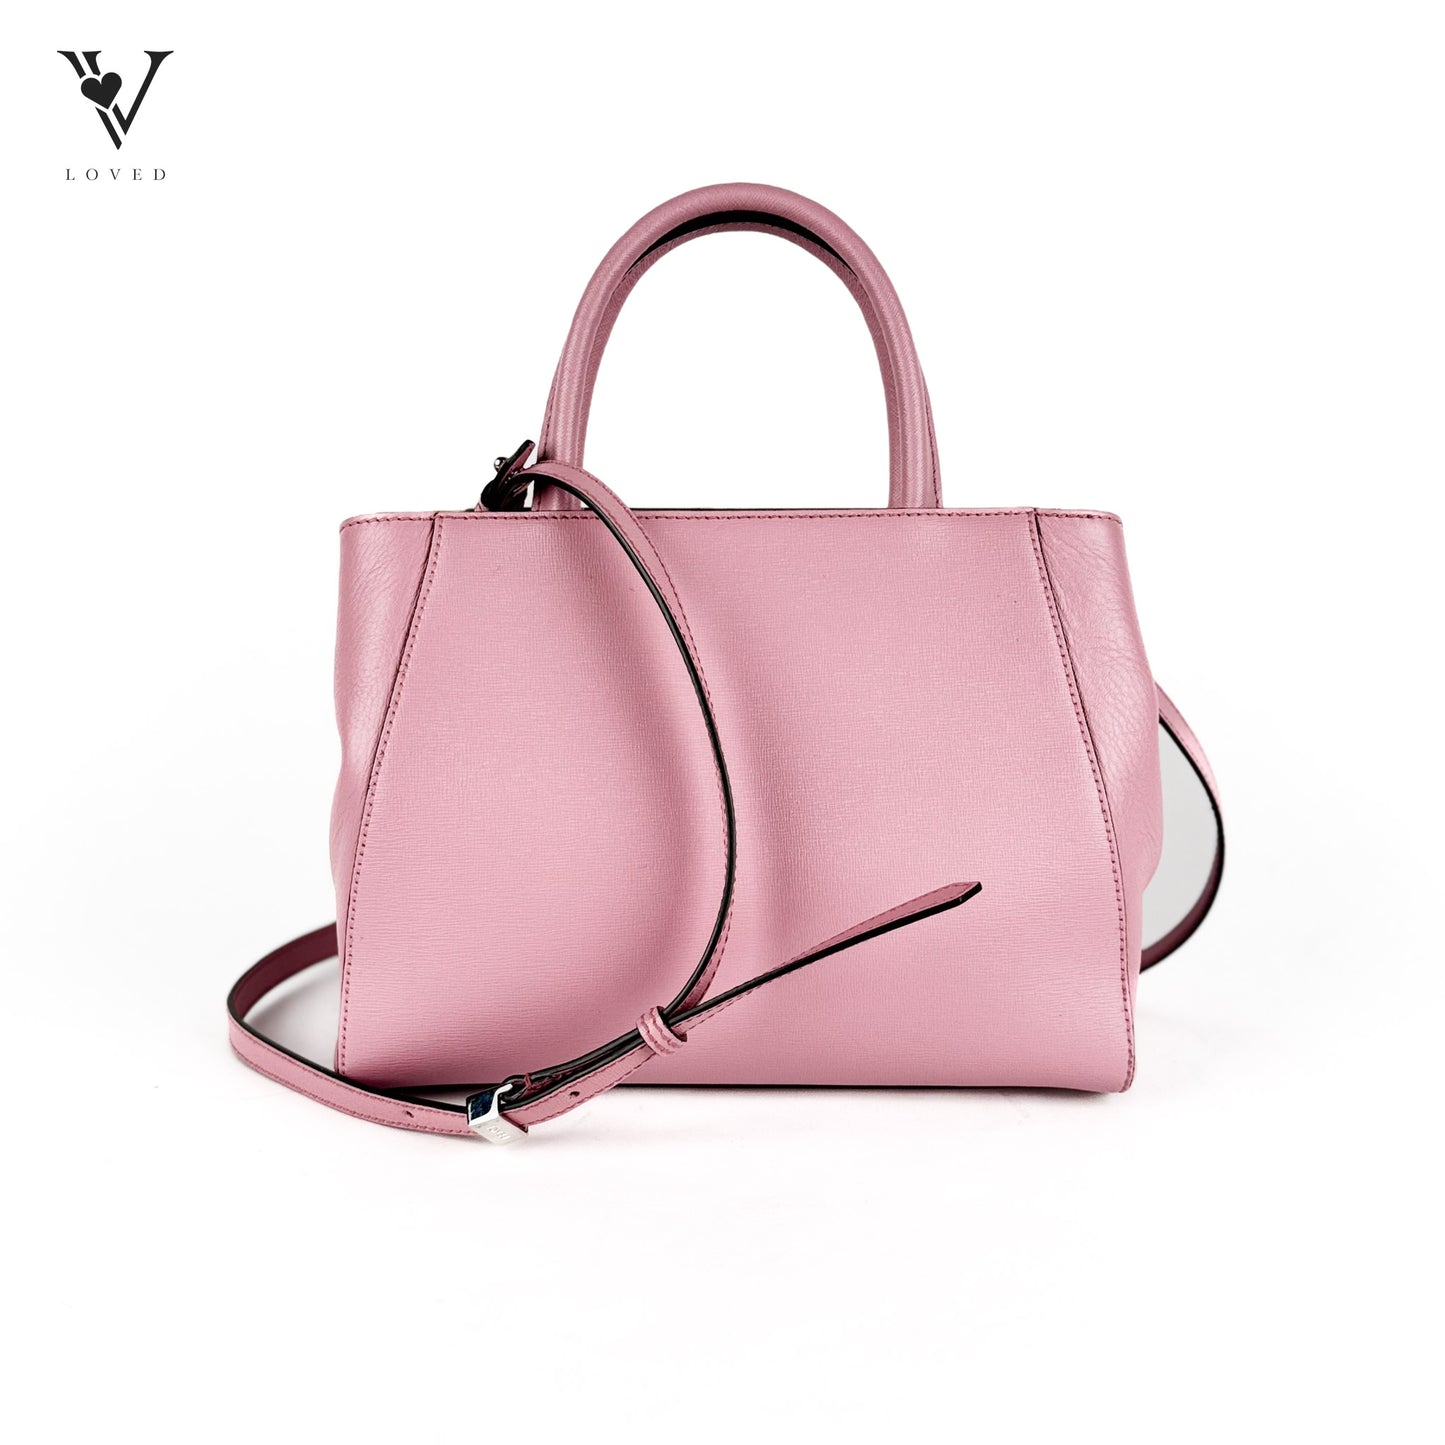 2Jours in Pink Saffiano Leather